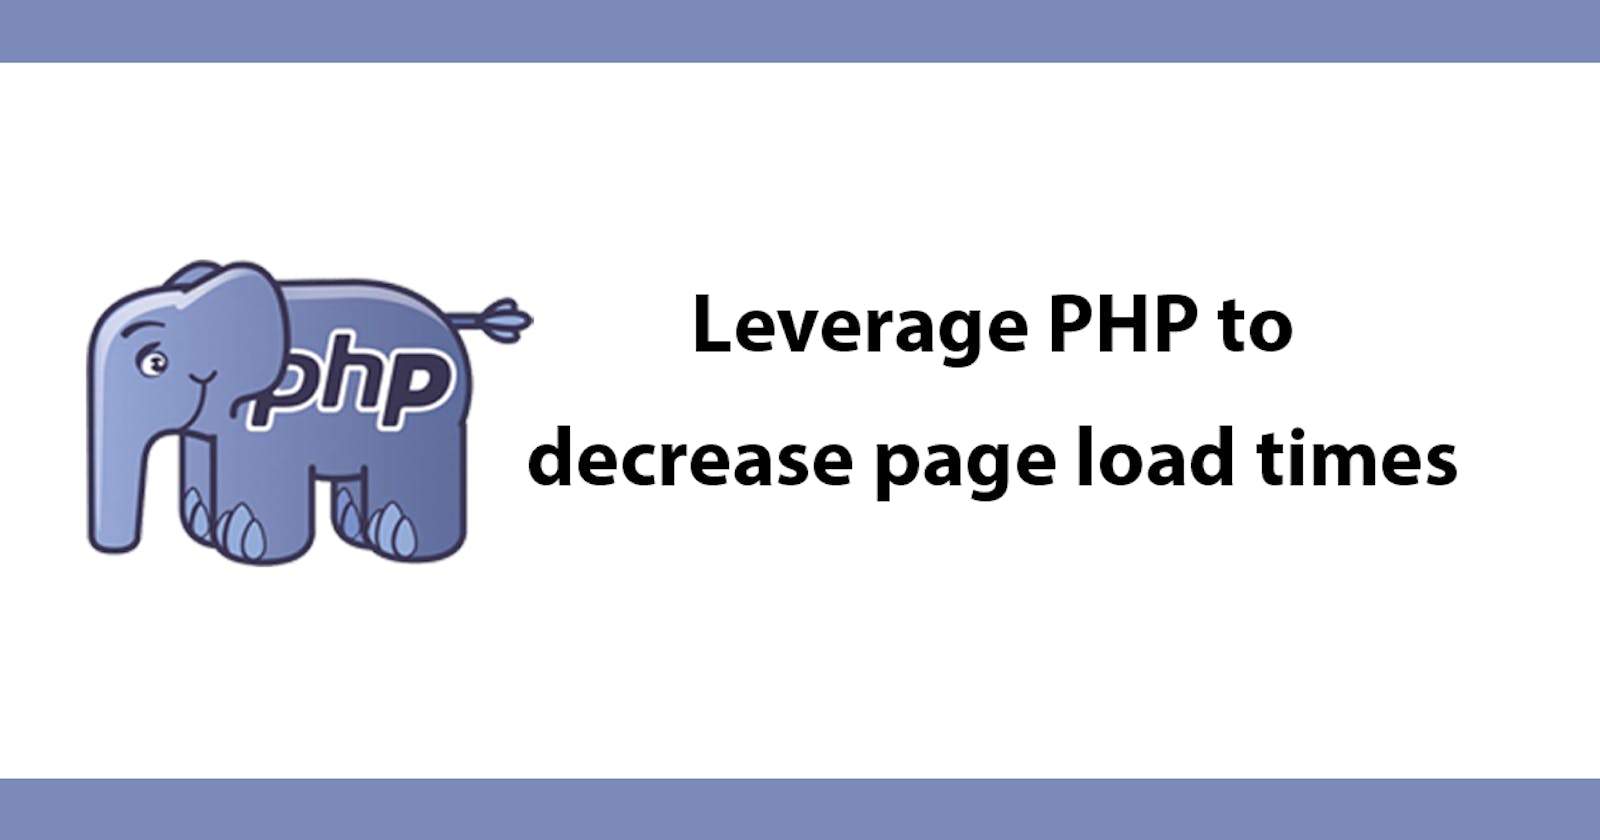 Leverage PHP to decrease page load times